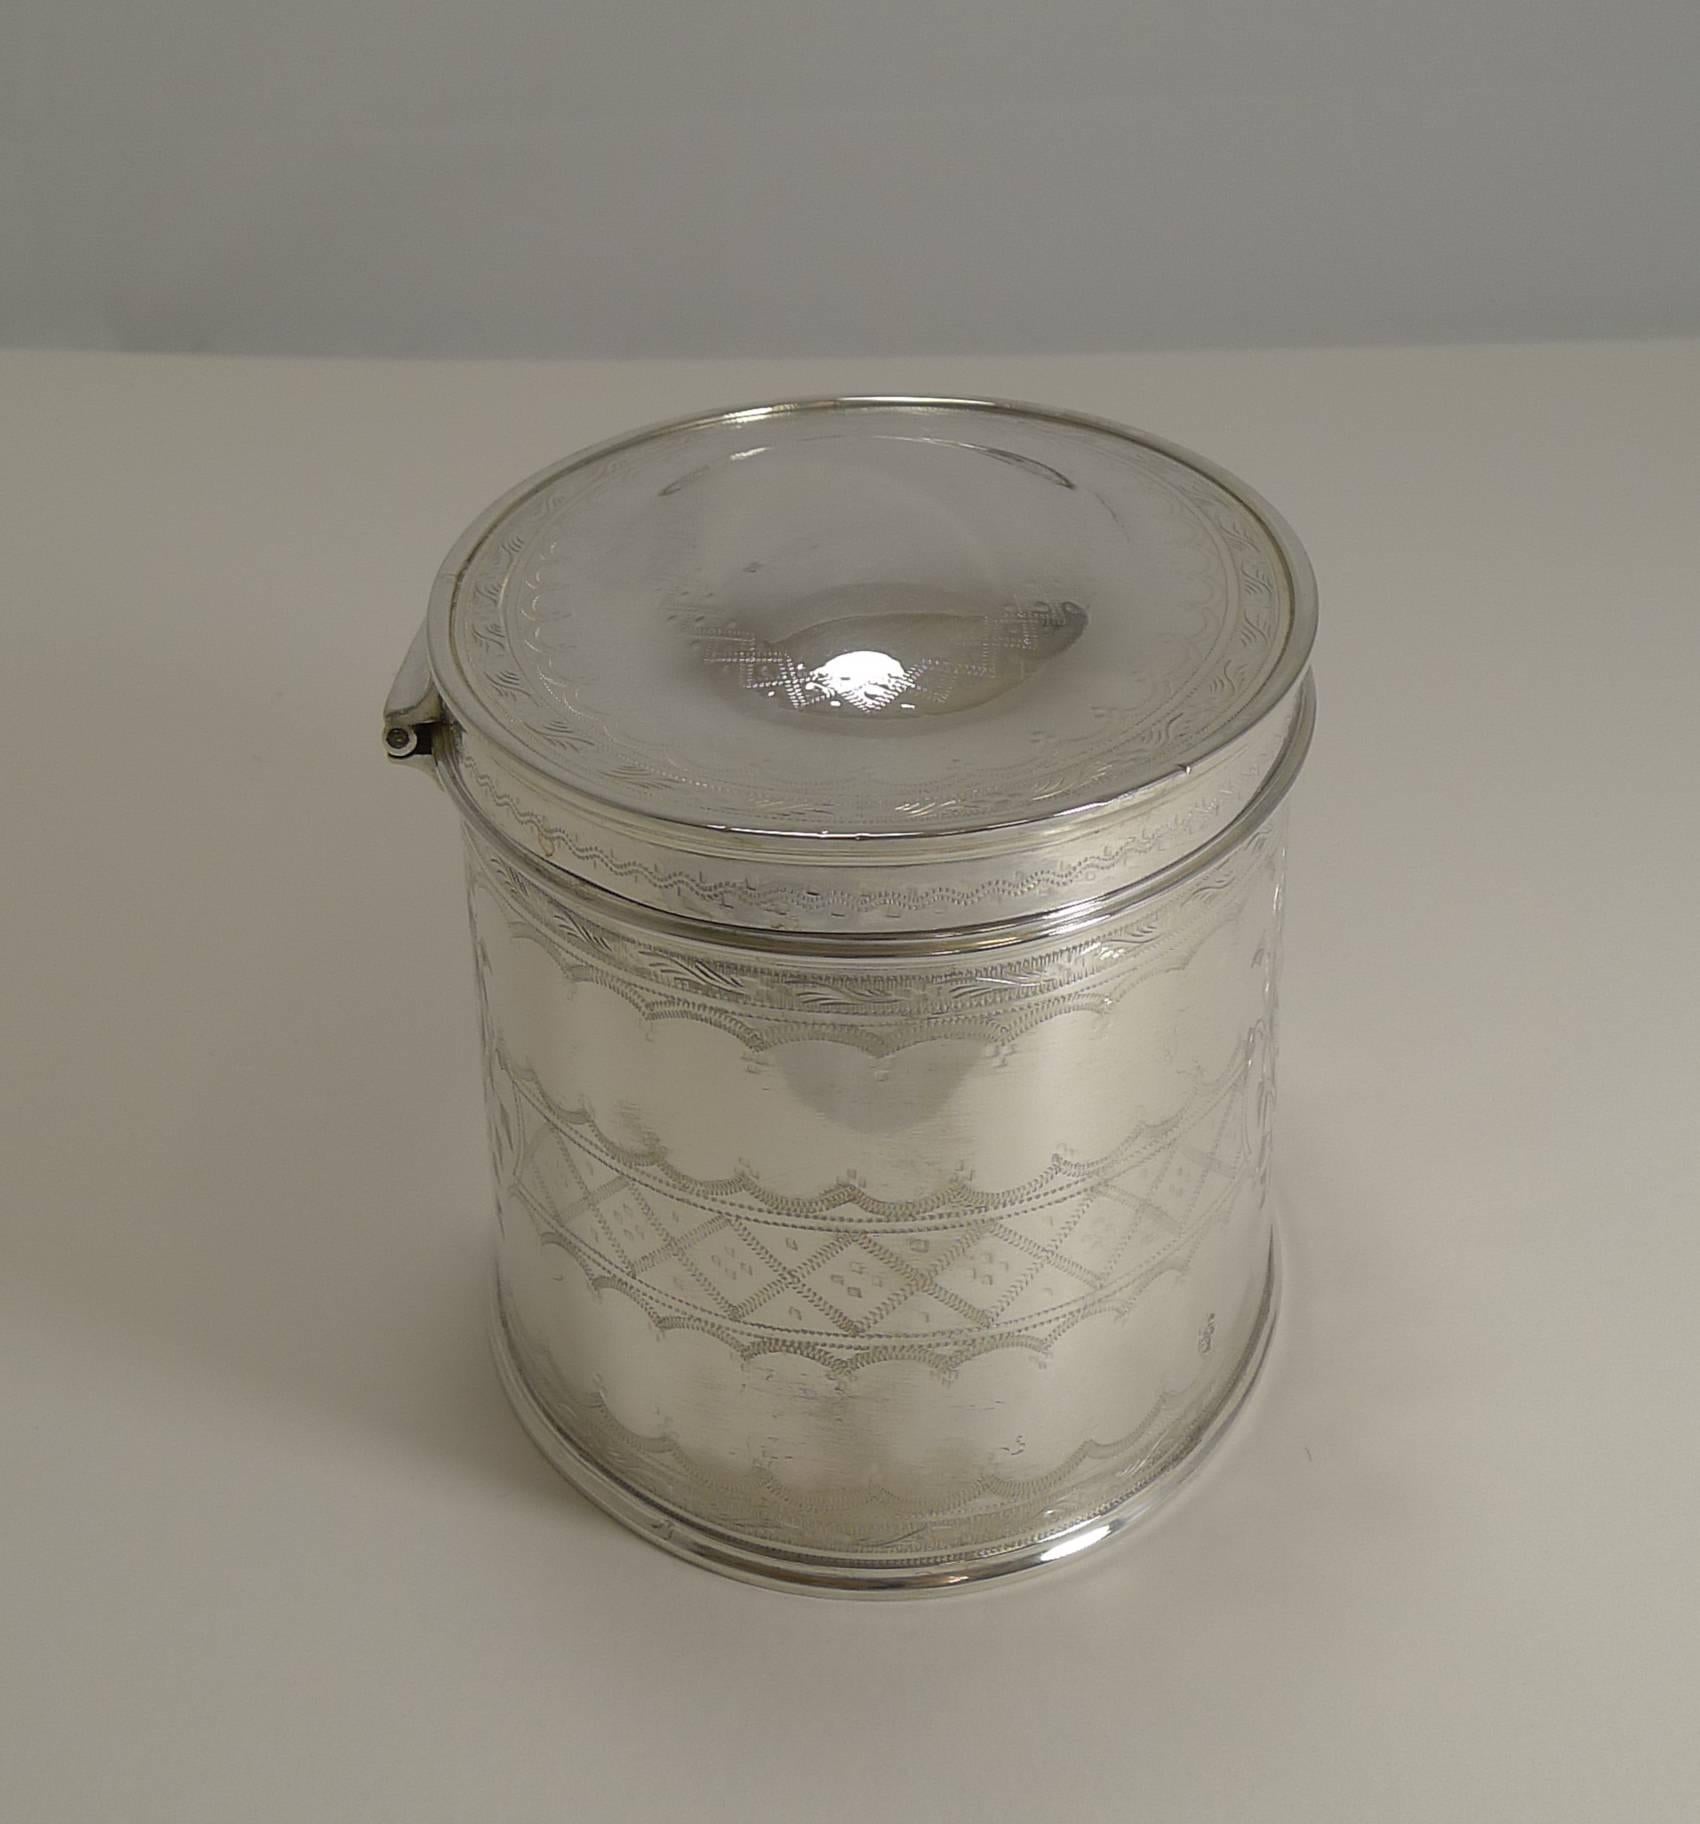 Early 20th Century Quality Large Antique English Silver Plated Tea Caddy, circa 1900